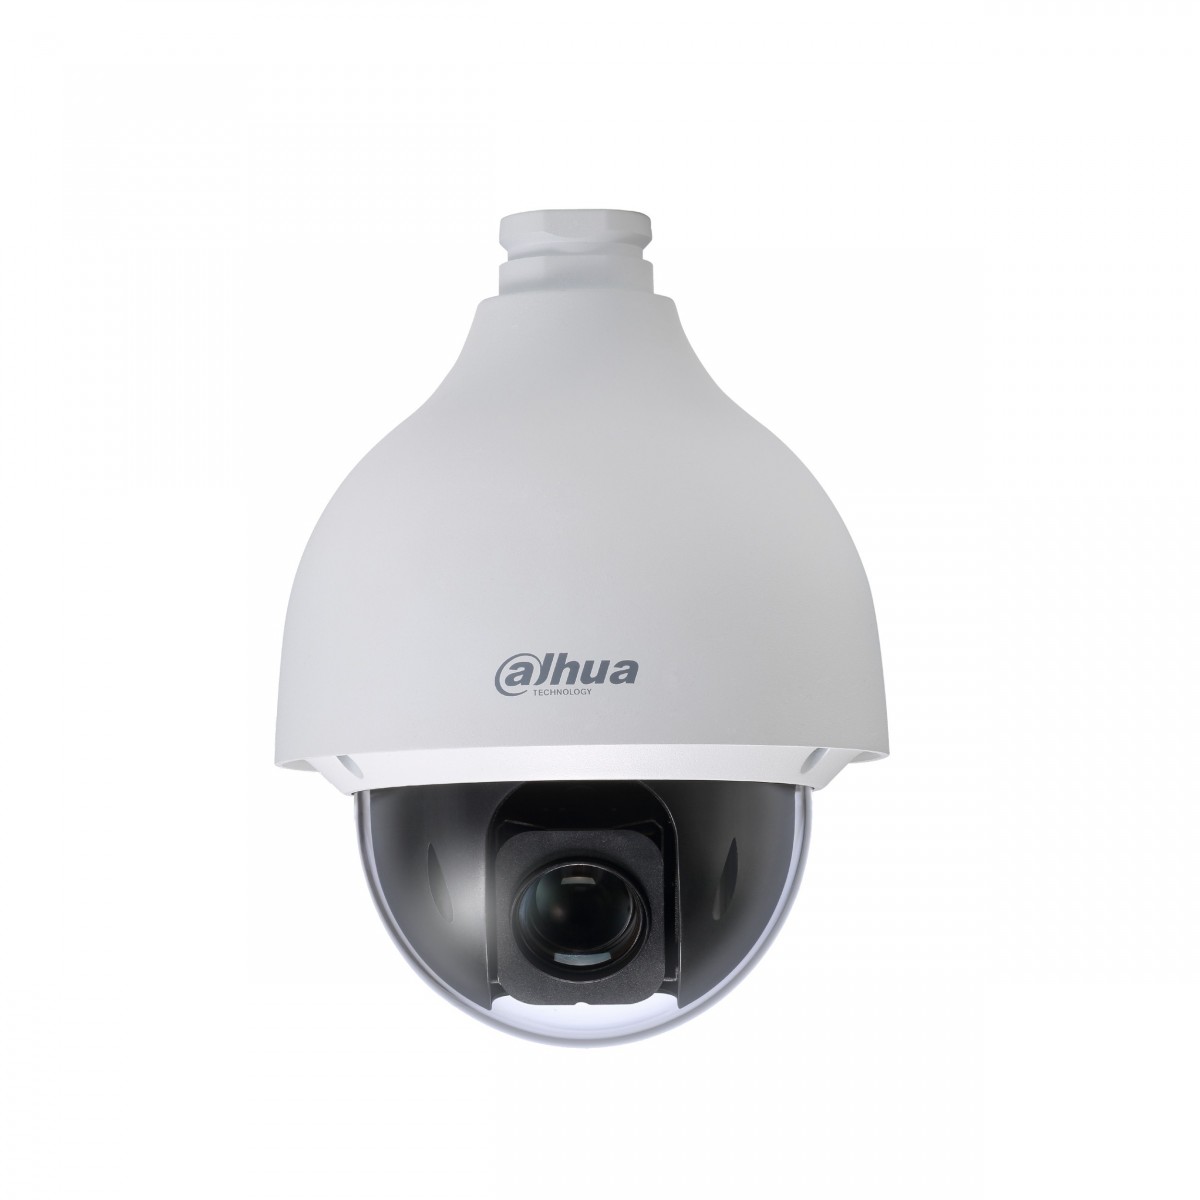 Dahua Technology Pro SD50225U-HNI - IP security camera - Indoor & outdoor - Wired - Auto scan - Auto pan - Preset point - DH-SD 